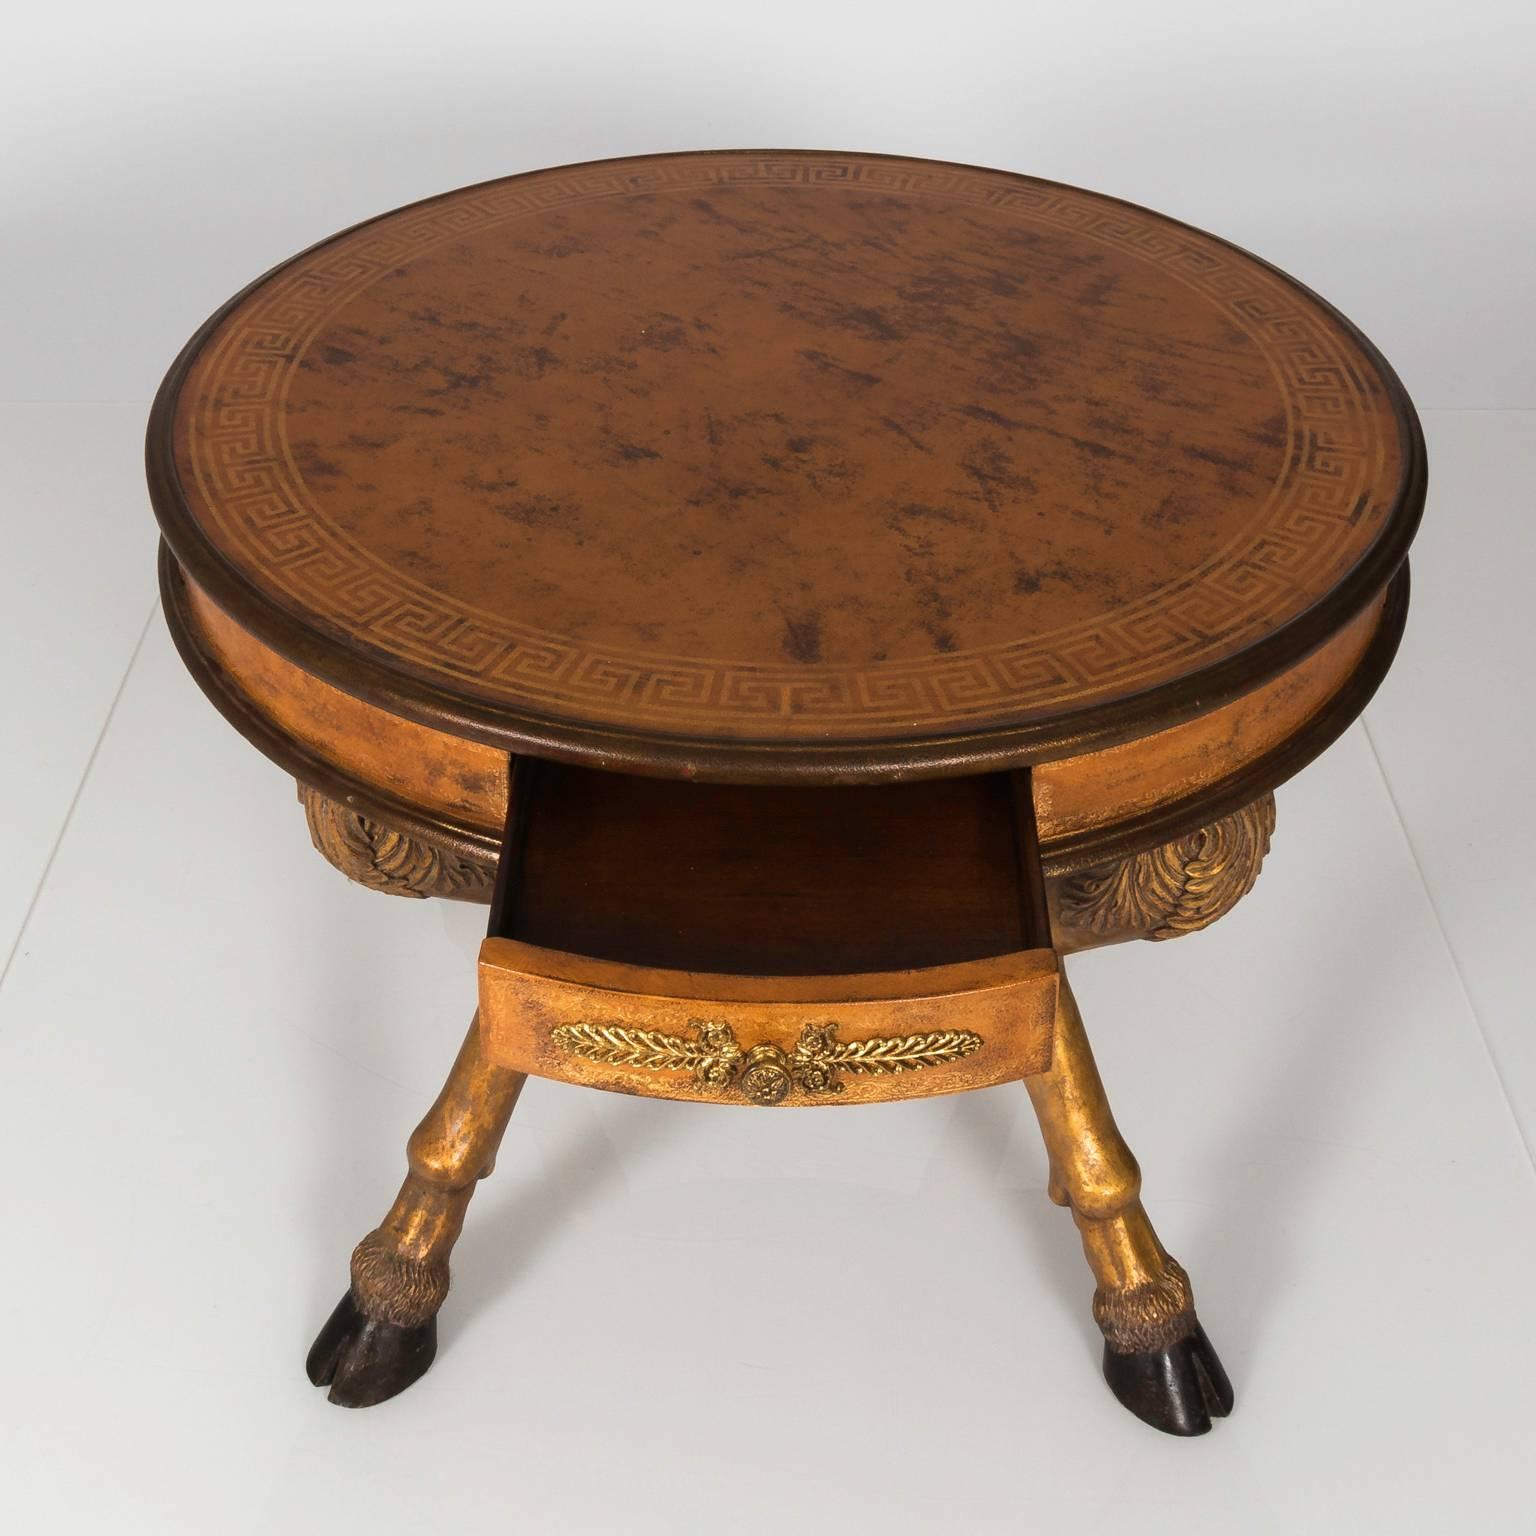 Early 20th century Empire style centre table resting on a goat shaped four legged base with round leather top and Greek key banding. The table skirt is leather with four small drawers embellished with brass mounts. Legs are hand-carved gilded and